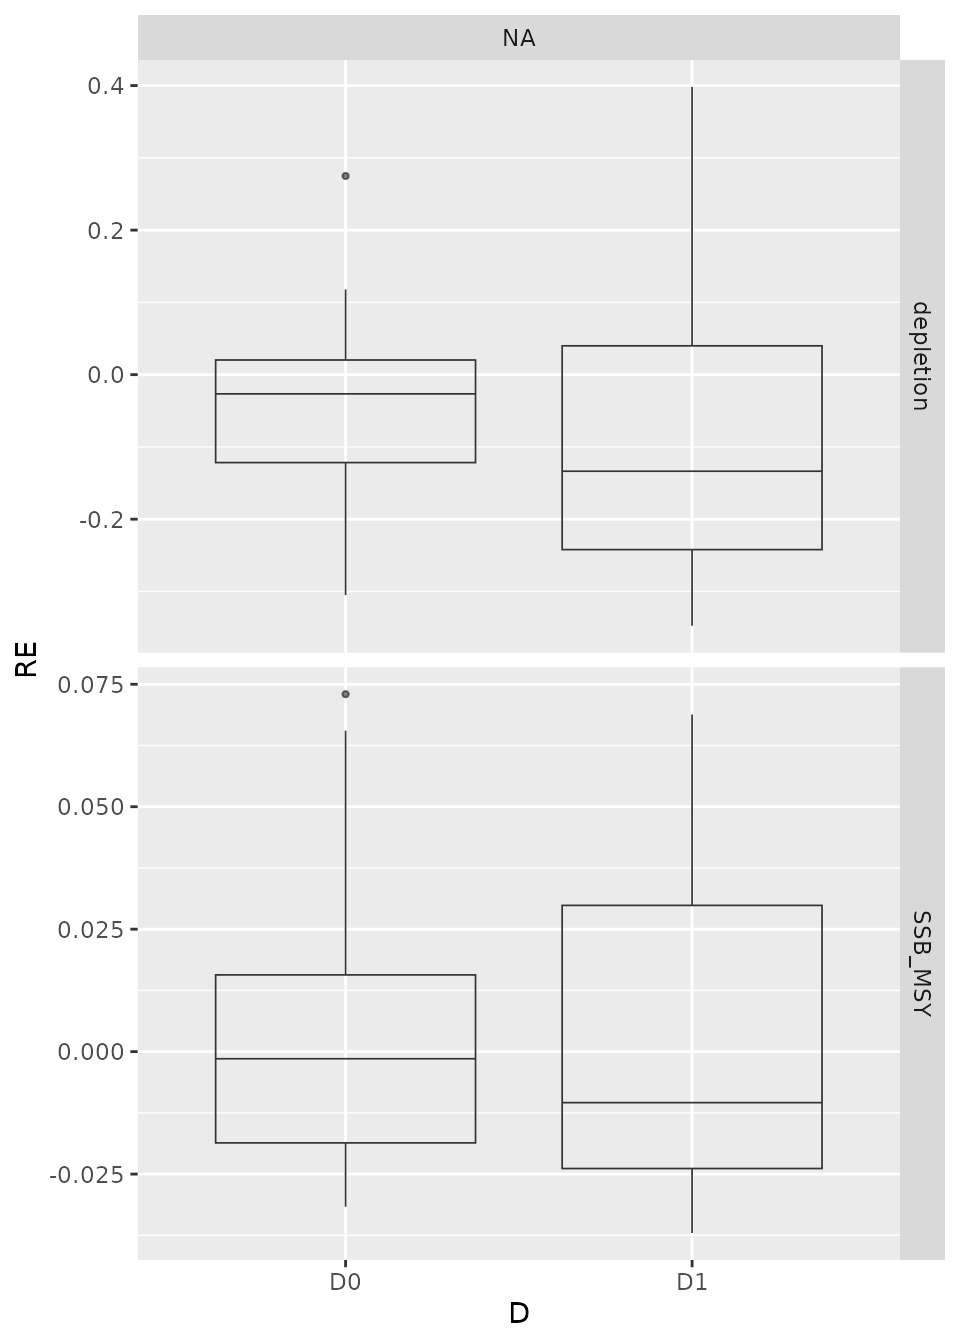 Box plots of relative error (RE) for stochastic runs. $M$ is fixed at the true value from the OM (E0) or estimated (E1). The standard deviation on the survey index observation error is 0.4 (D1) or 0.1 (D0), representing an increase in survey sampling effort.